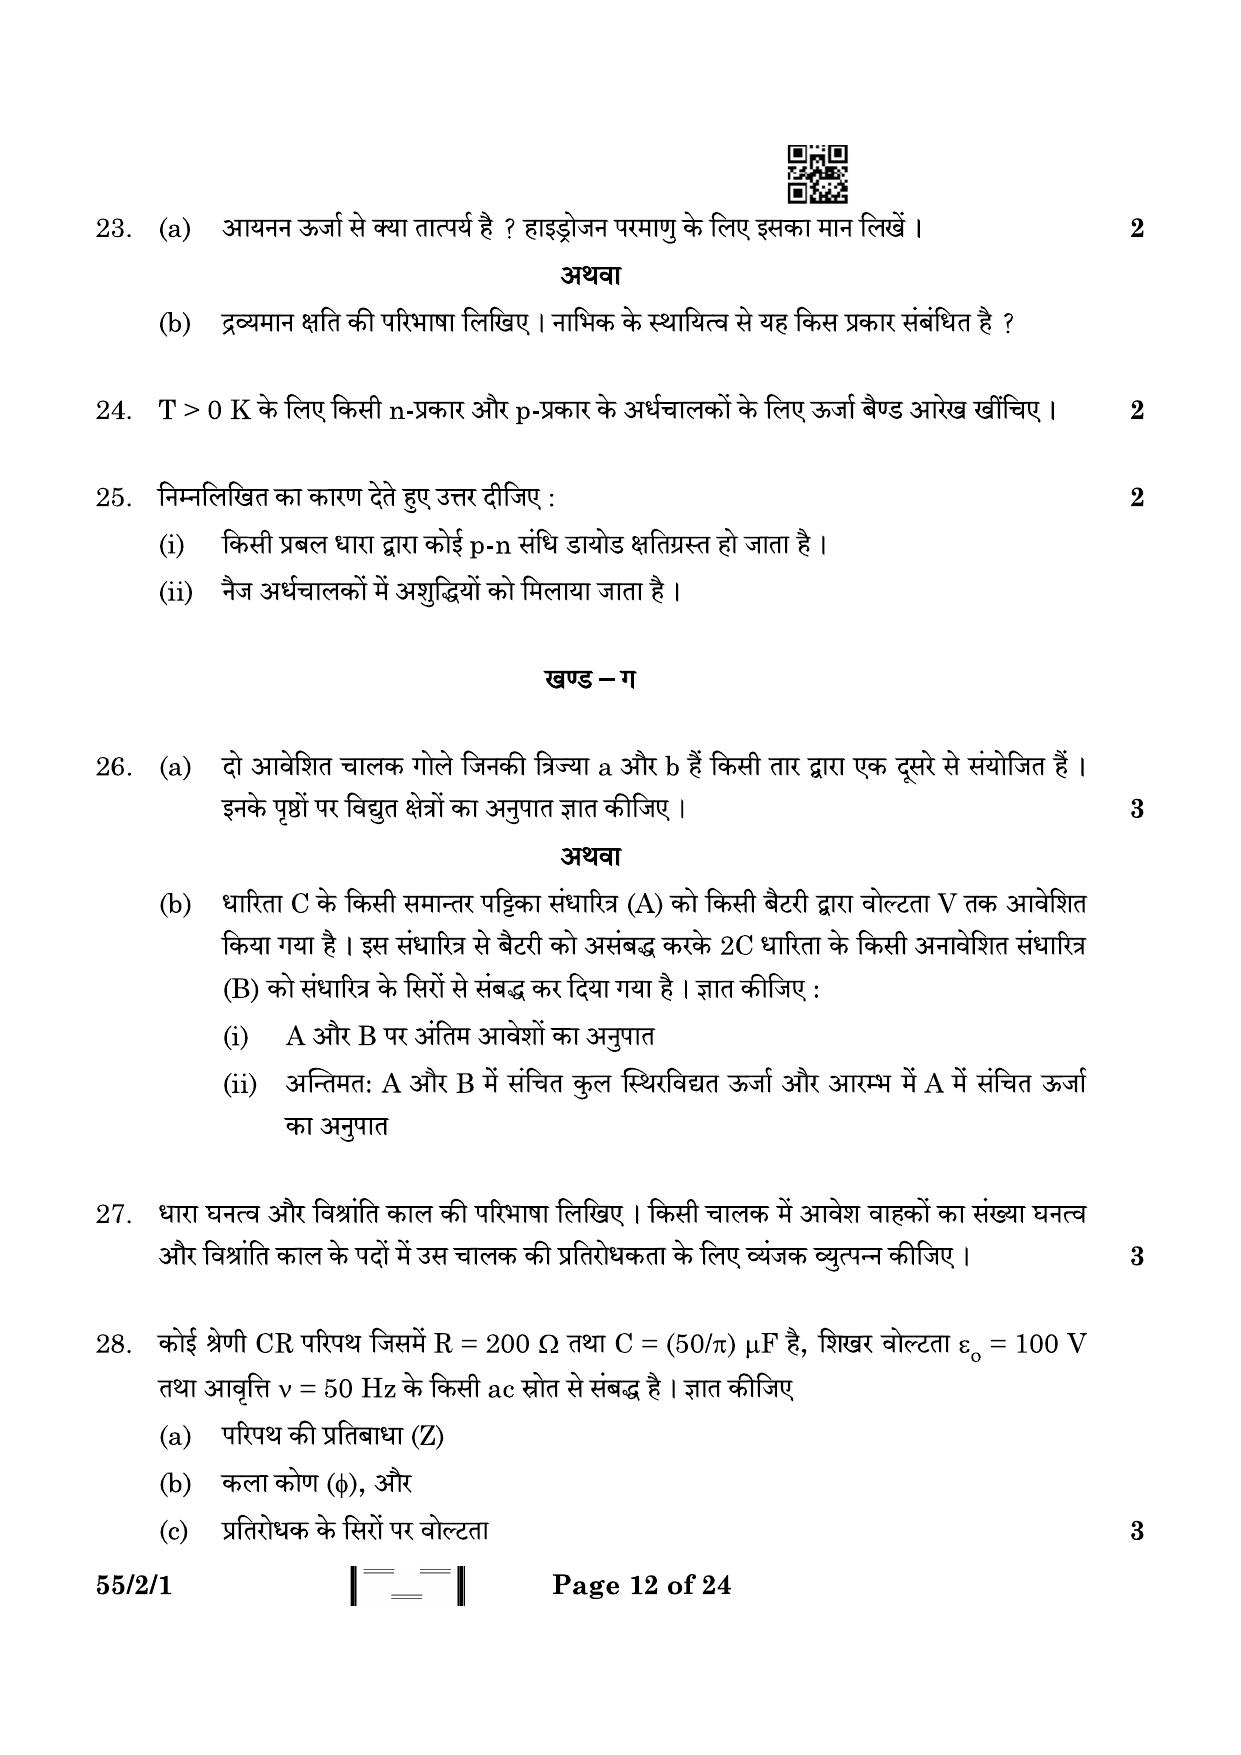 CBSE Class 12 55-2-1 Physics 2023 Question Paper - Page 12